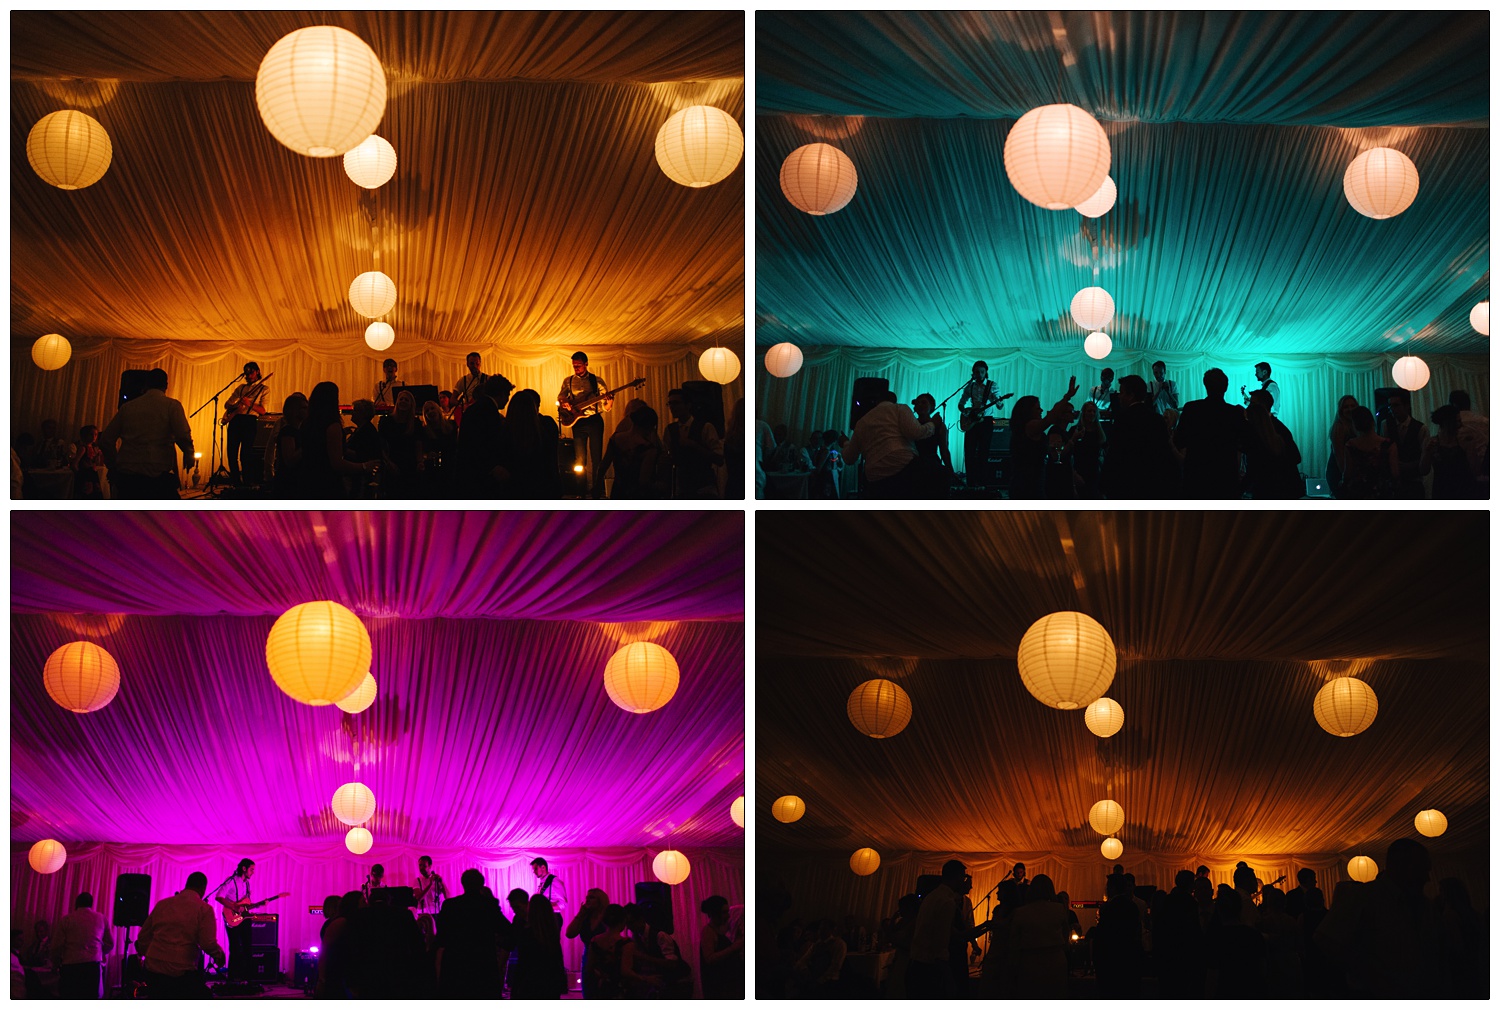 four pictures of the band playing and the people dancing are silhouettes. The lighting is orange, cyan, magenta, and orange again. Ball paper lantern lights hang from the ceiling of the marquee.